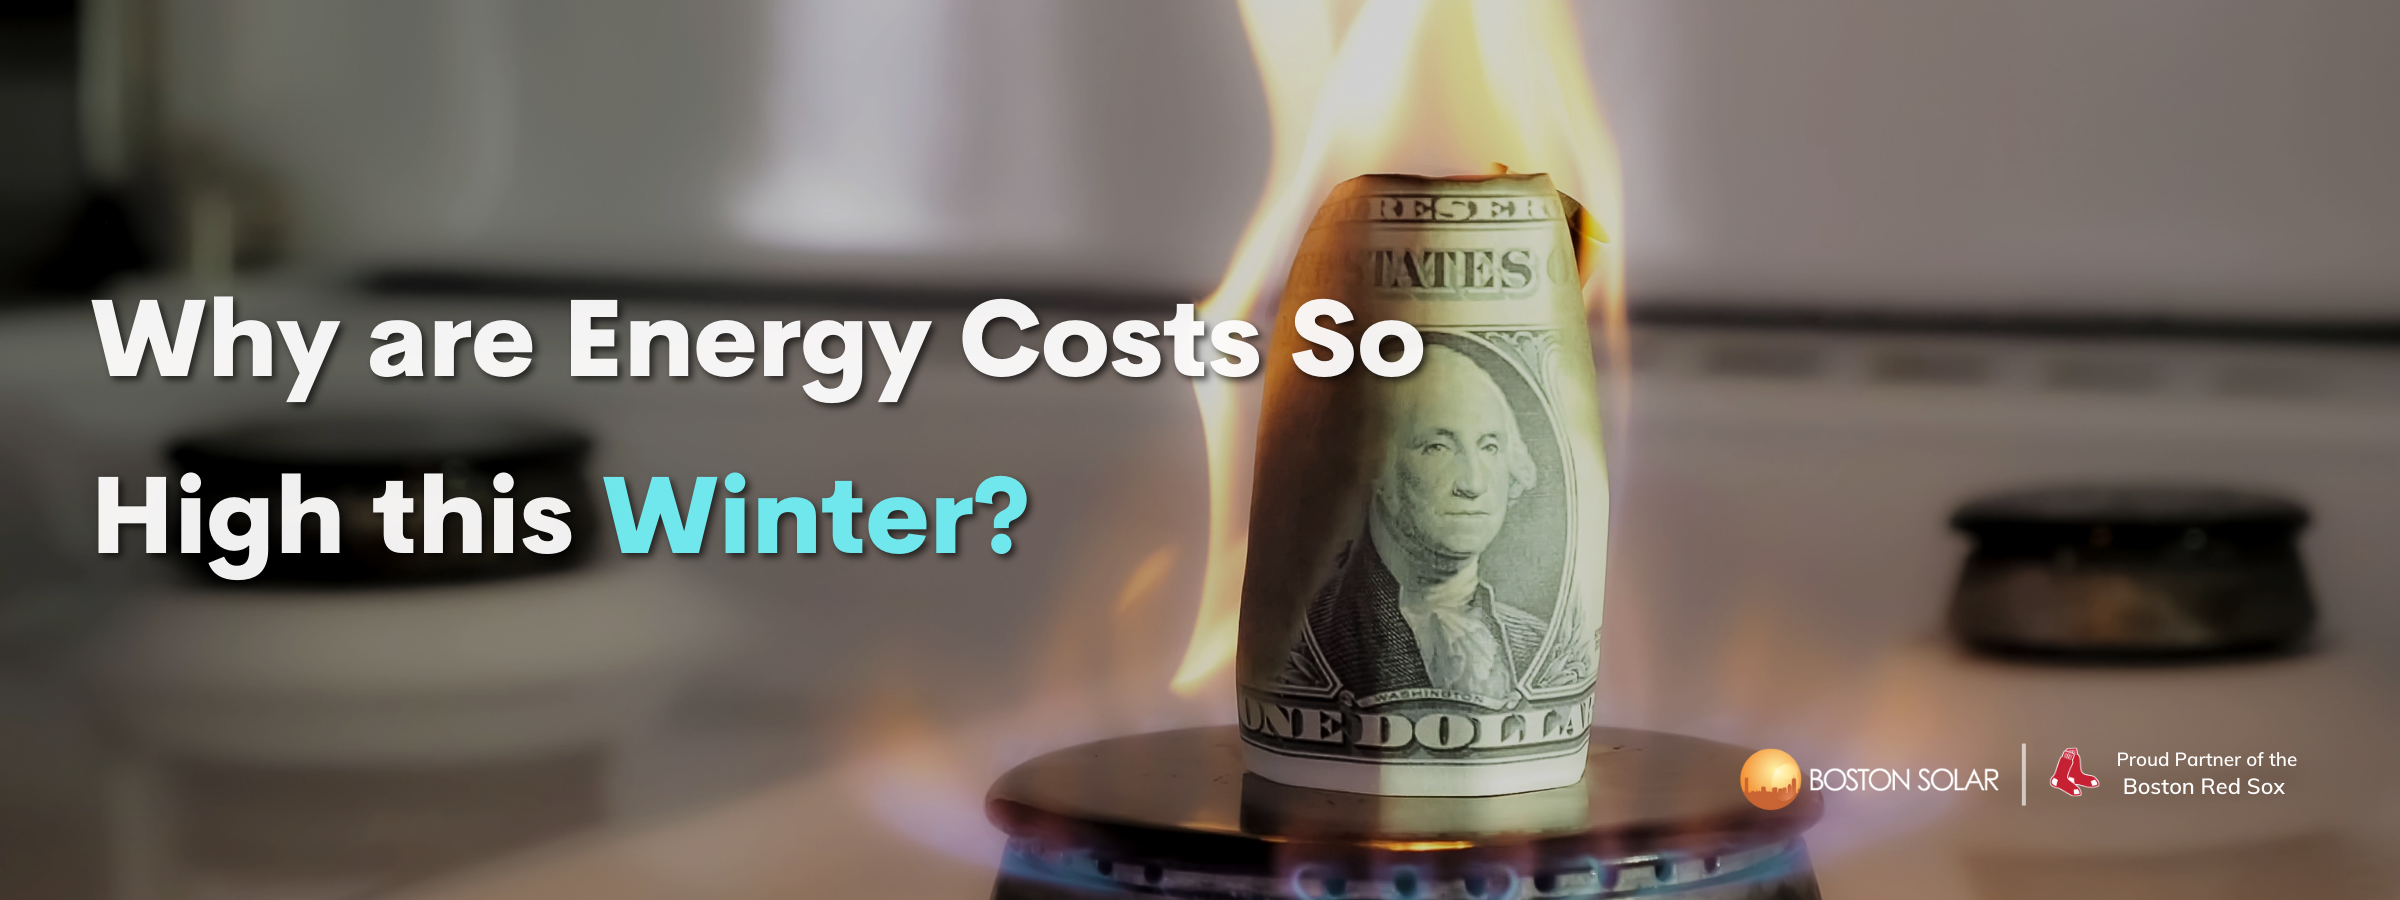 Why Are Energy Costs So High this Winter?